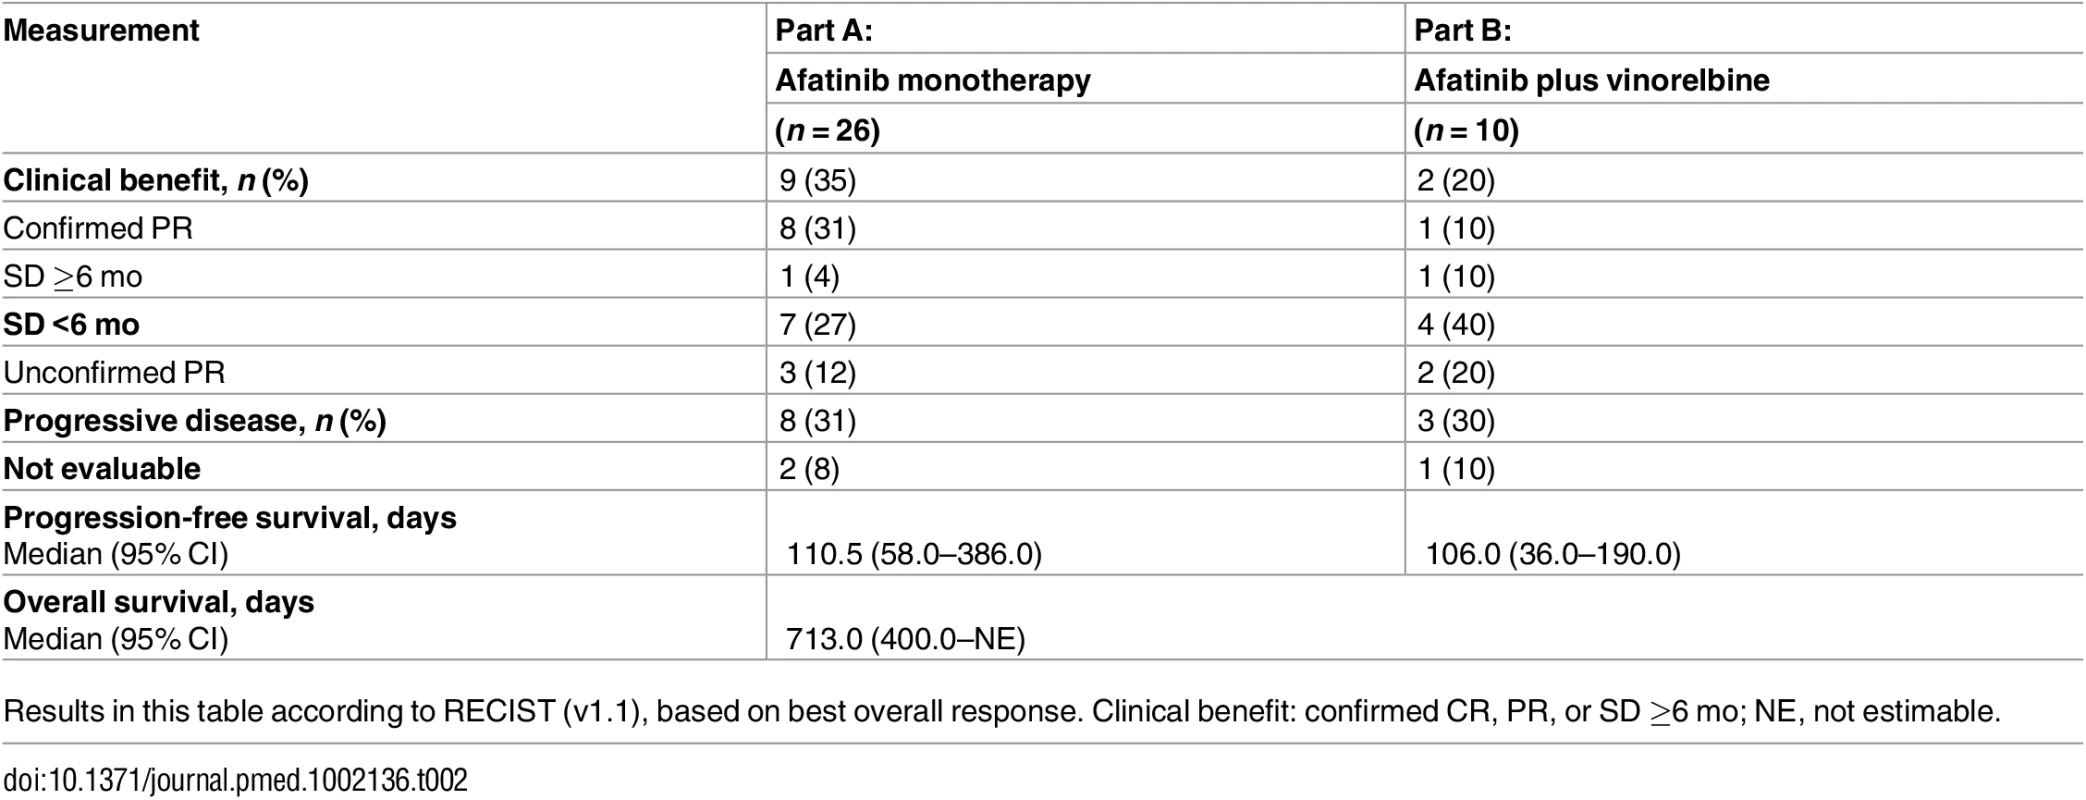 Summary of efficacy in patients enrolled in clinical trial.